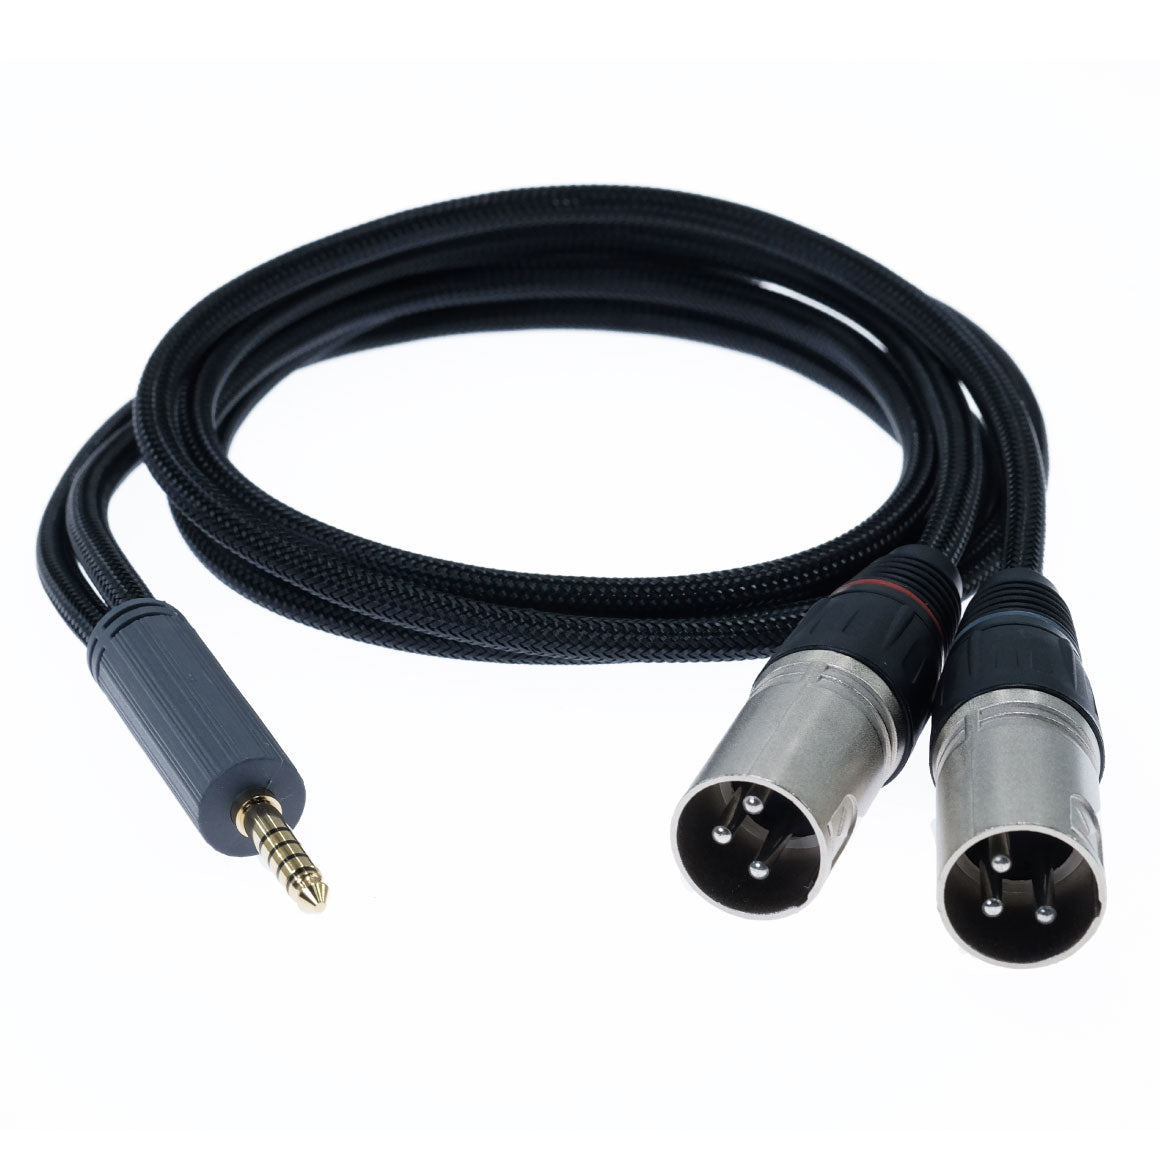 iFi Audio - Standard Edition 4.4mm to XLR Cable